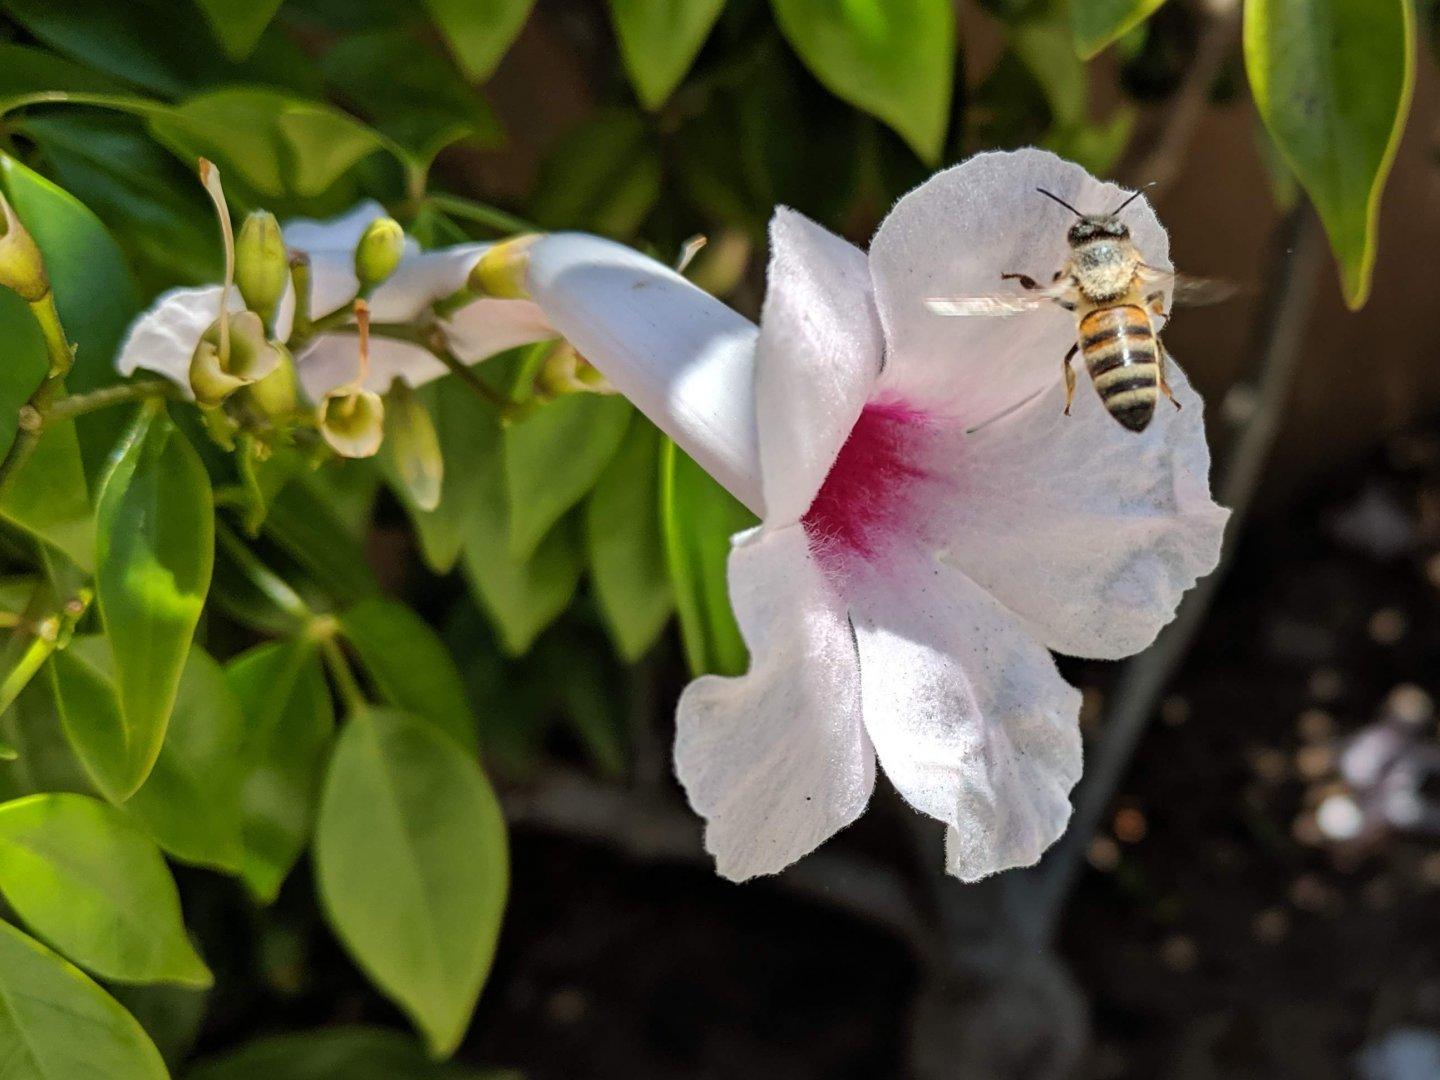 This bee was crawling into one of these trumpet shaped flowers after another. I finally decided to aim at the flower it had just climbed into, then wait for it to leave and see if I could catch it. Amazingly, it worked! #bees #flowers #garden